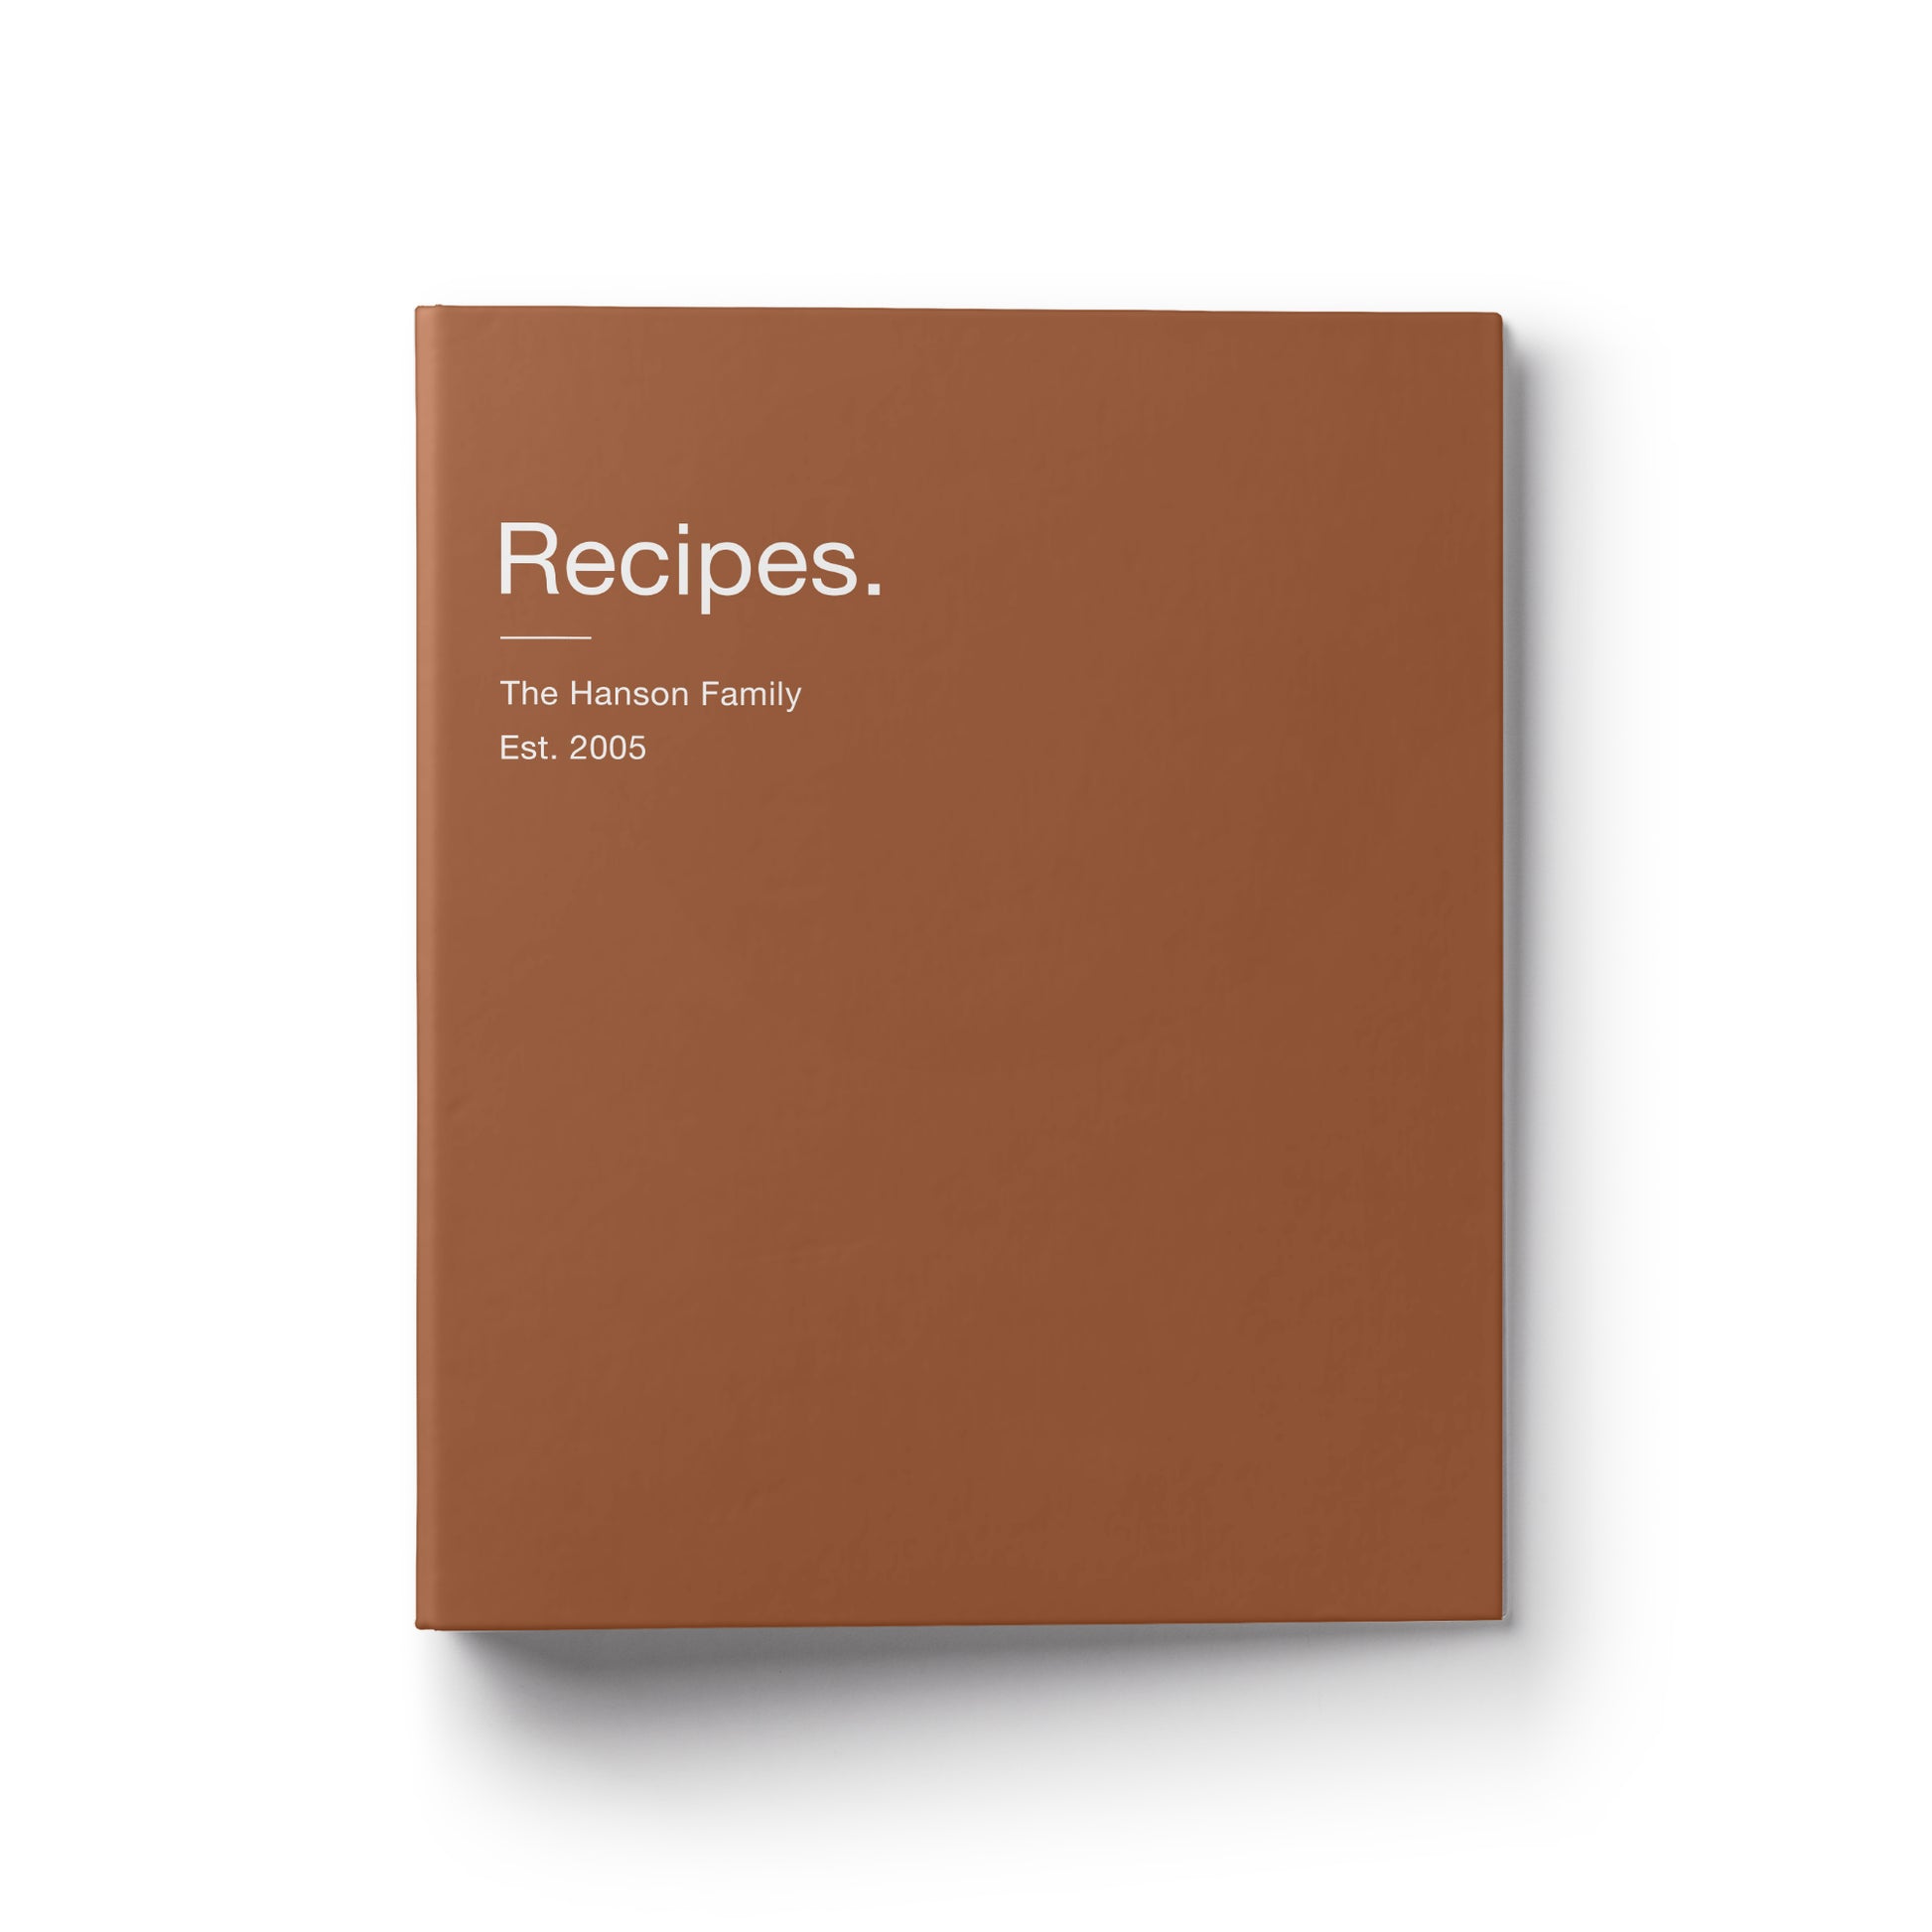 A modern custom recipe binder makes the perfect gift for any occasion